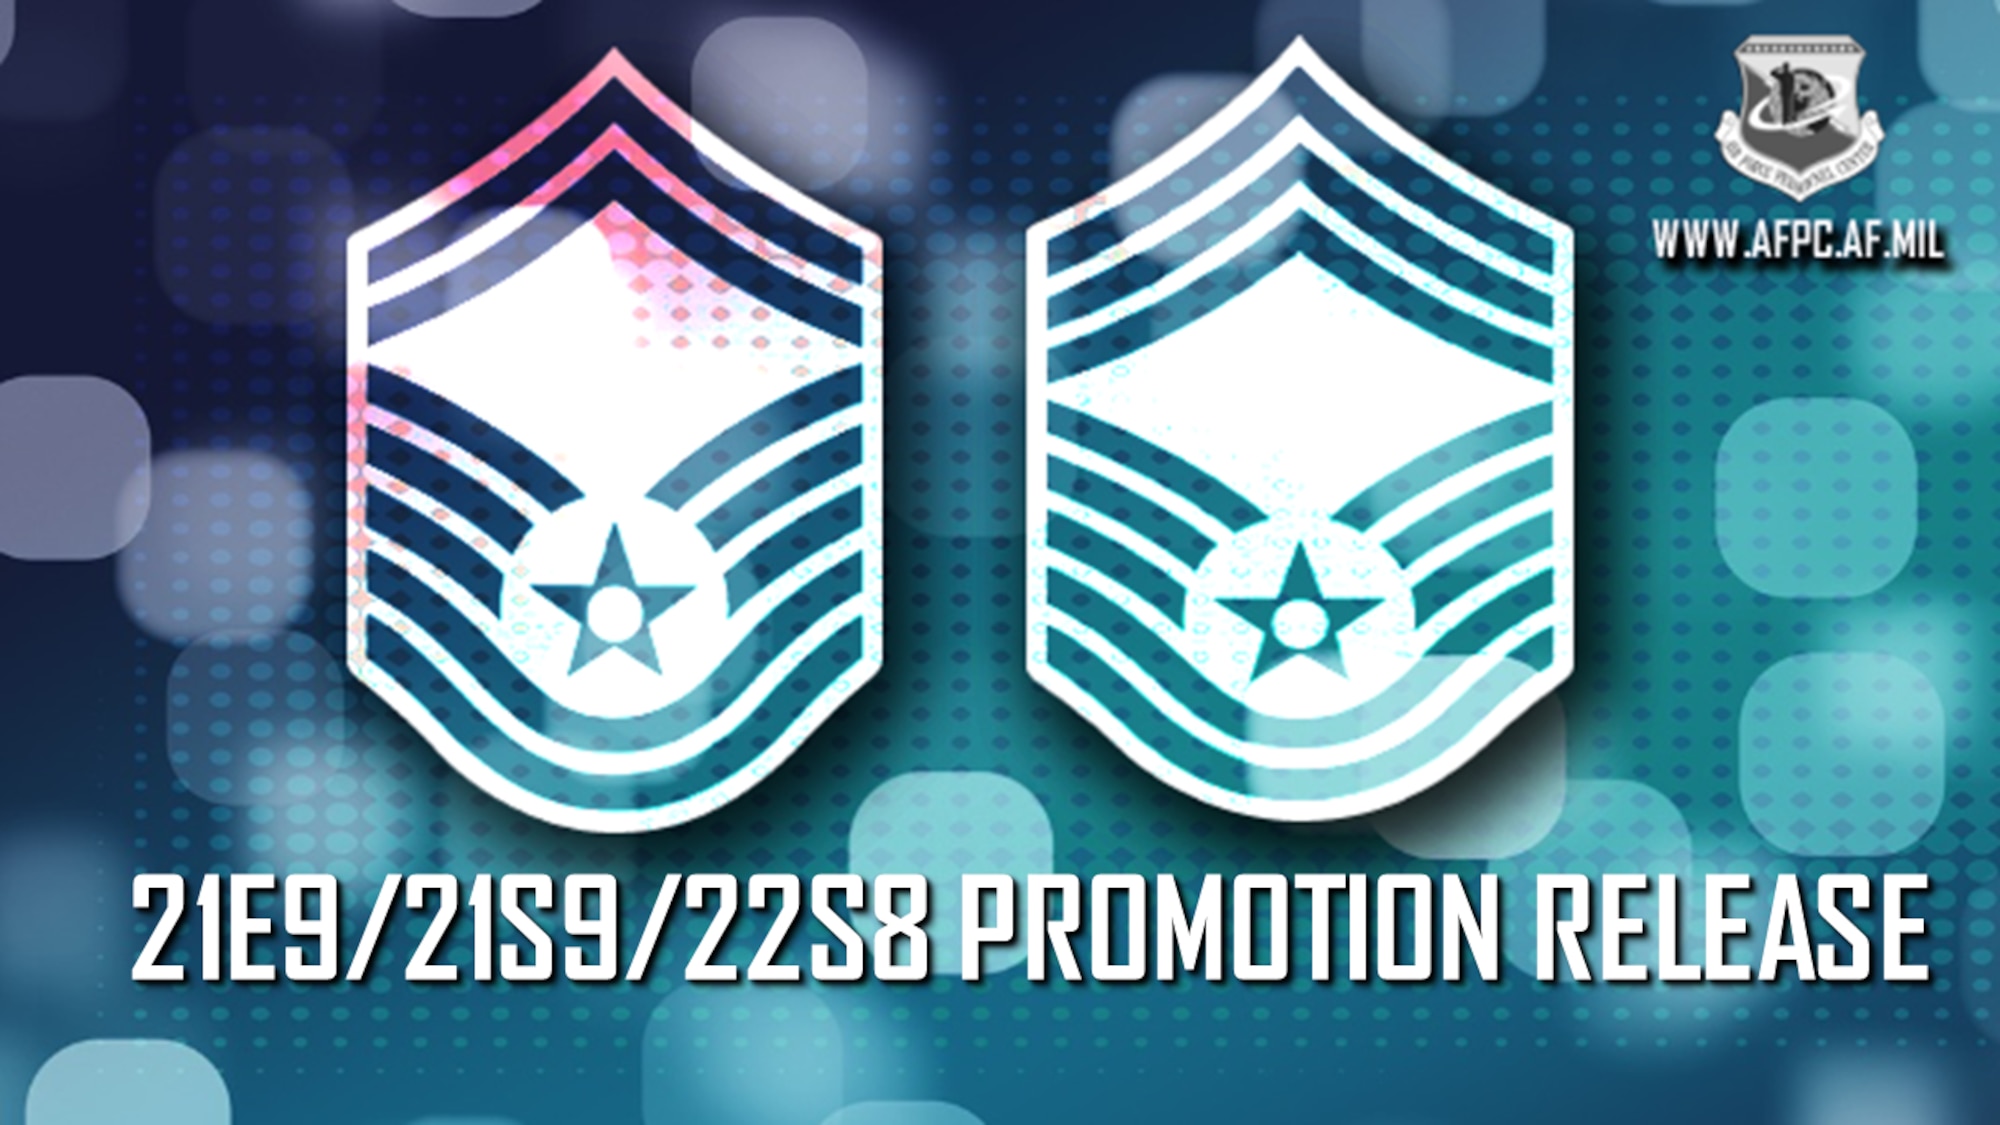 Graphic with a blue patterned background that reads "29E9/21S9/22S8 Promotion Release". The graphic shows the rang insignias of Air and Space Force Master Sergeant and Senior Master Sergeant